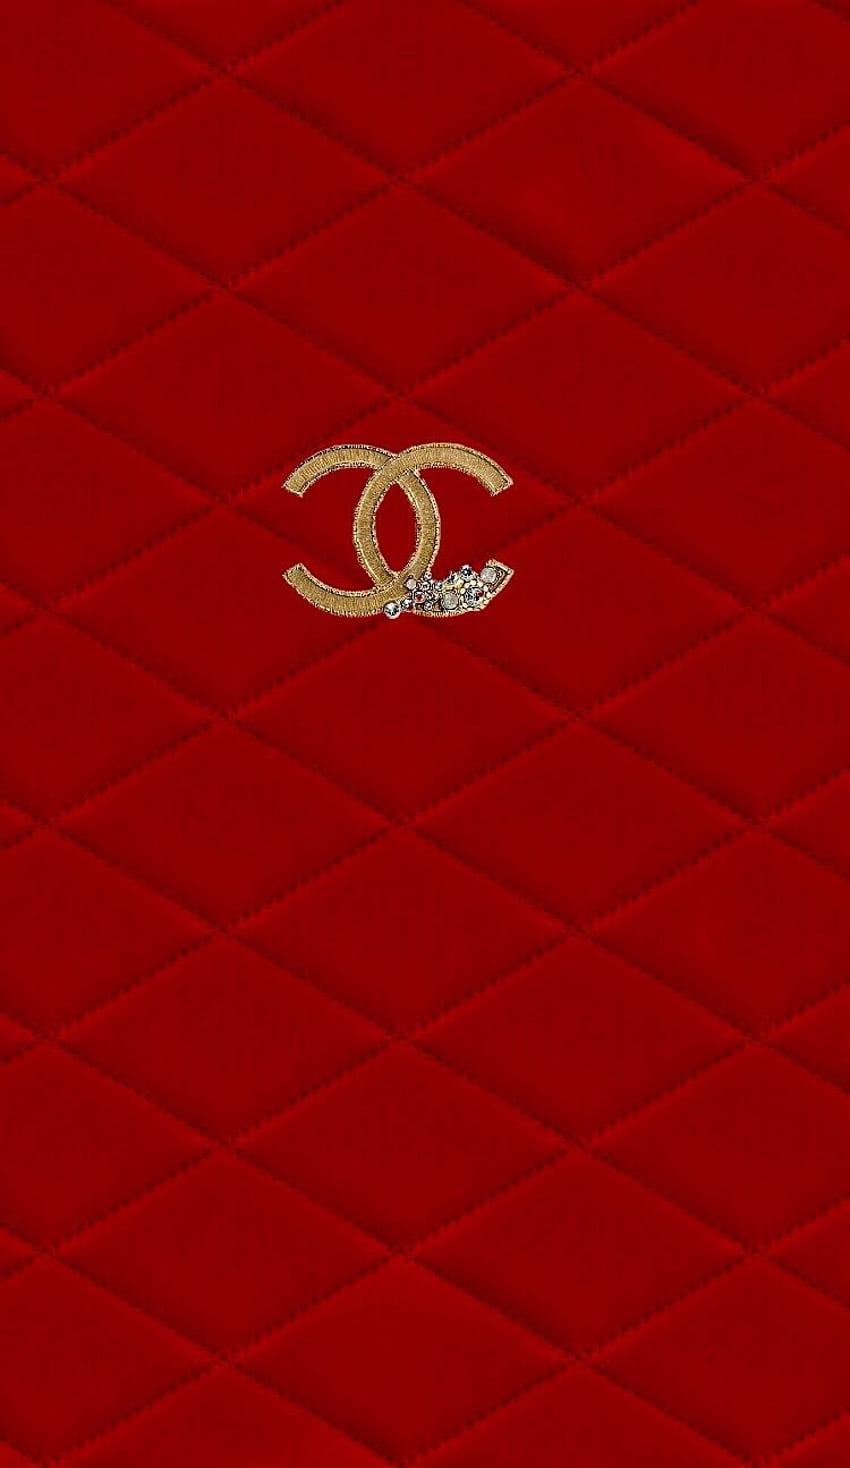 Louis Vuitton, Chanel, Gucci Wallpapers For iPhone  Iphone wallpaper  pattern, Iphone wallpaper, Iphone background wallpaper